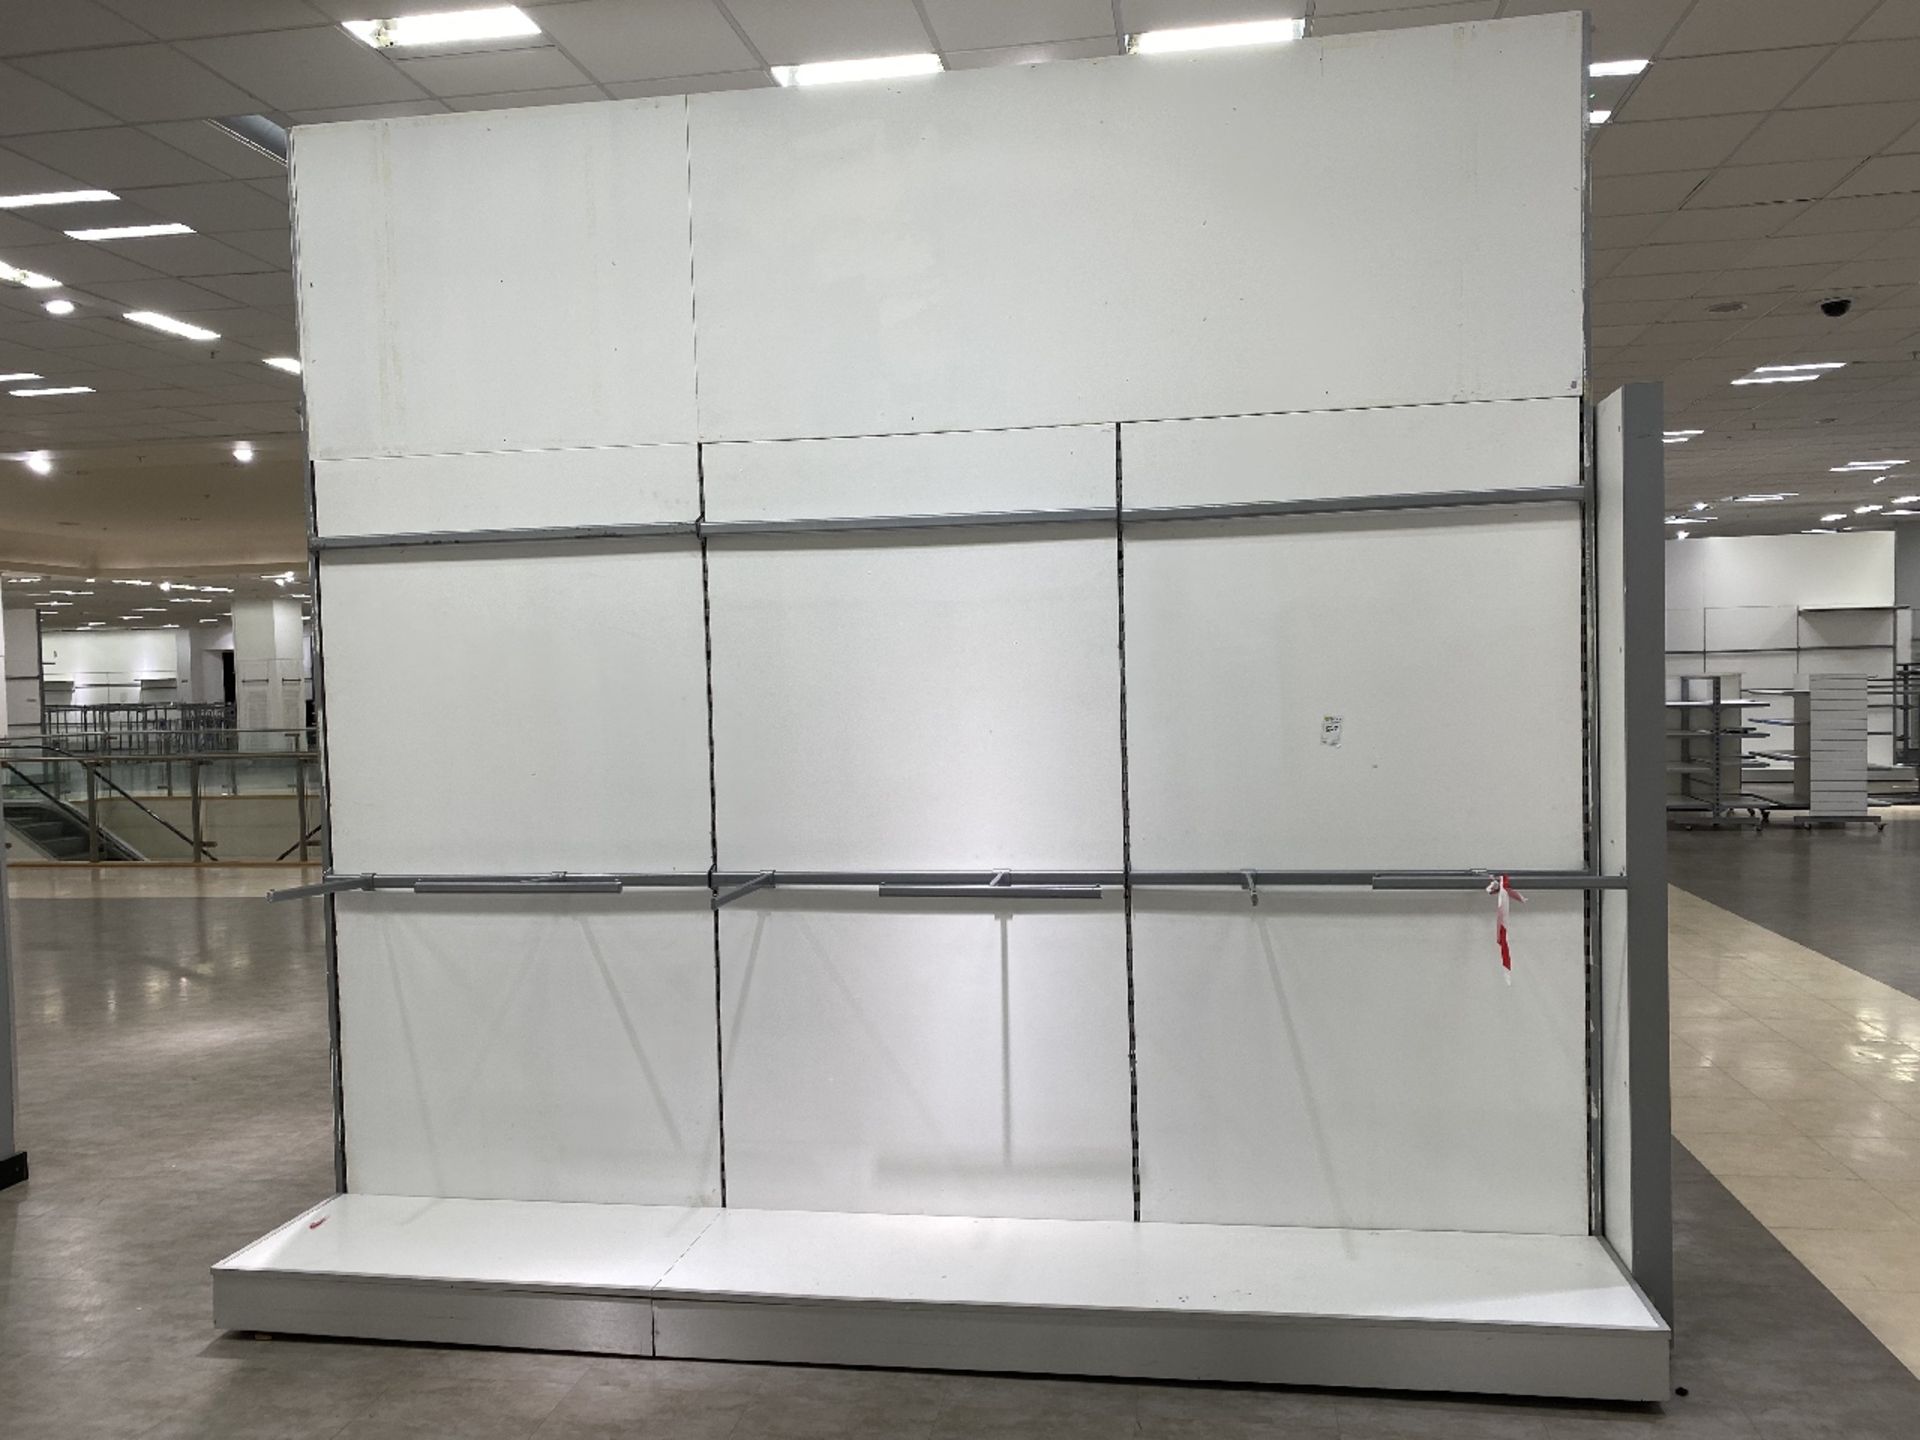 Large partition wall with shelving - Image 2 of 2